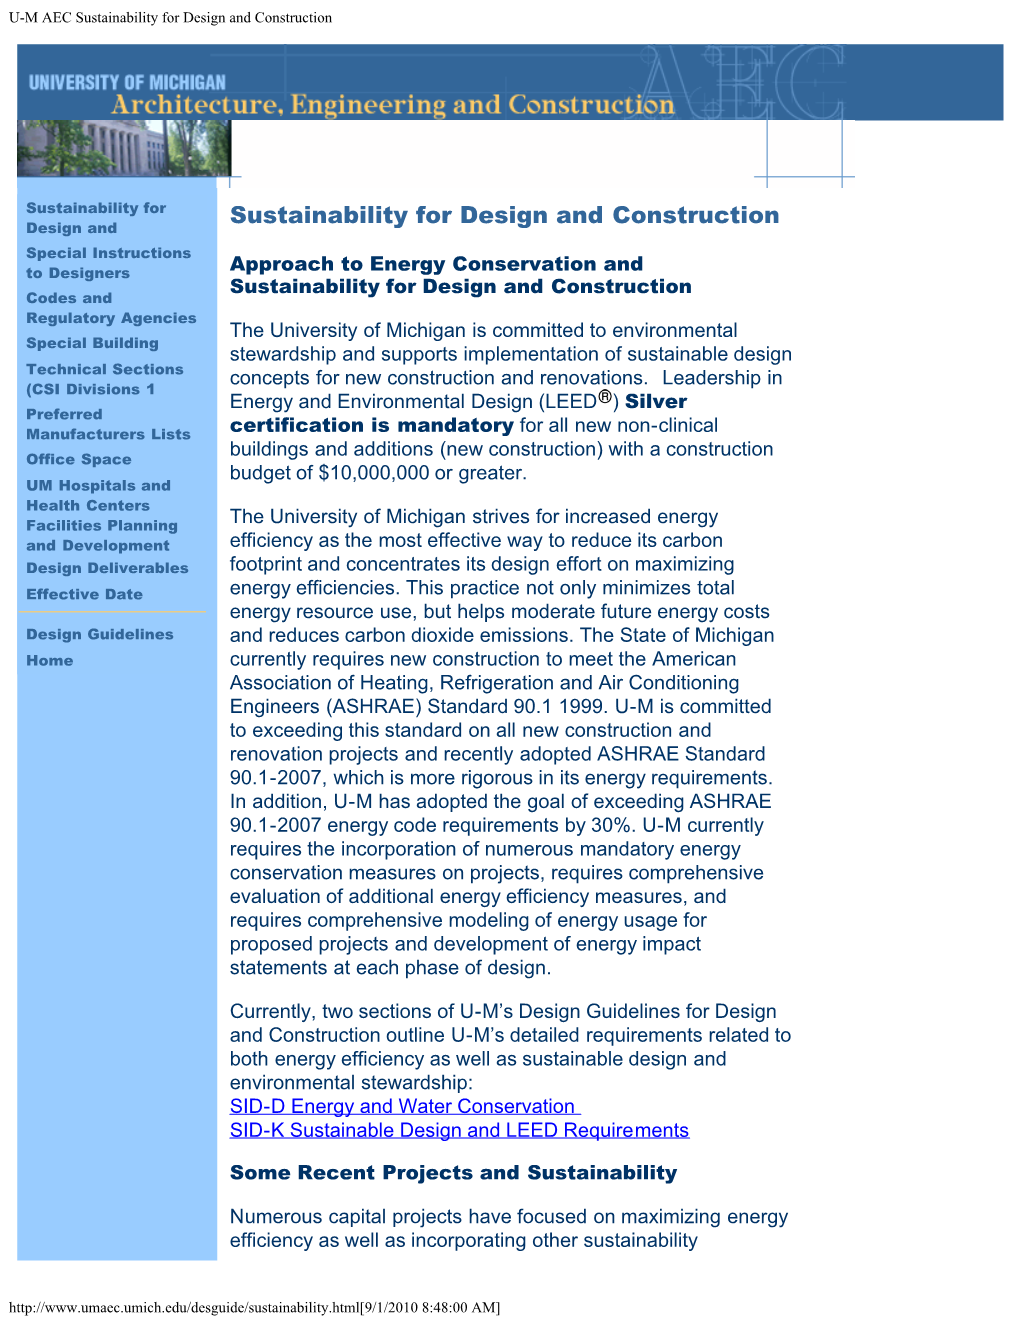 Sustainability for Design and Construction